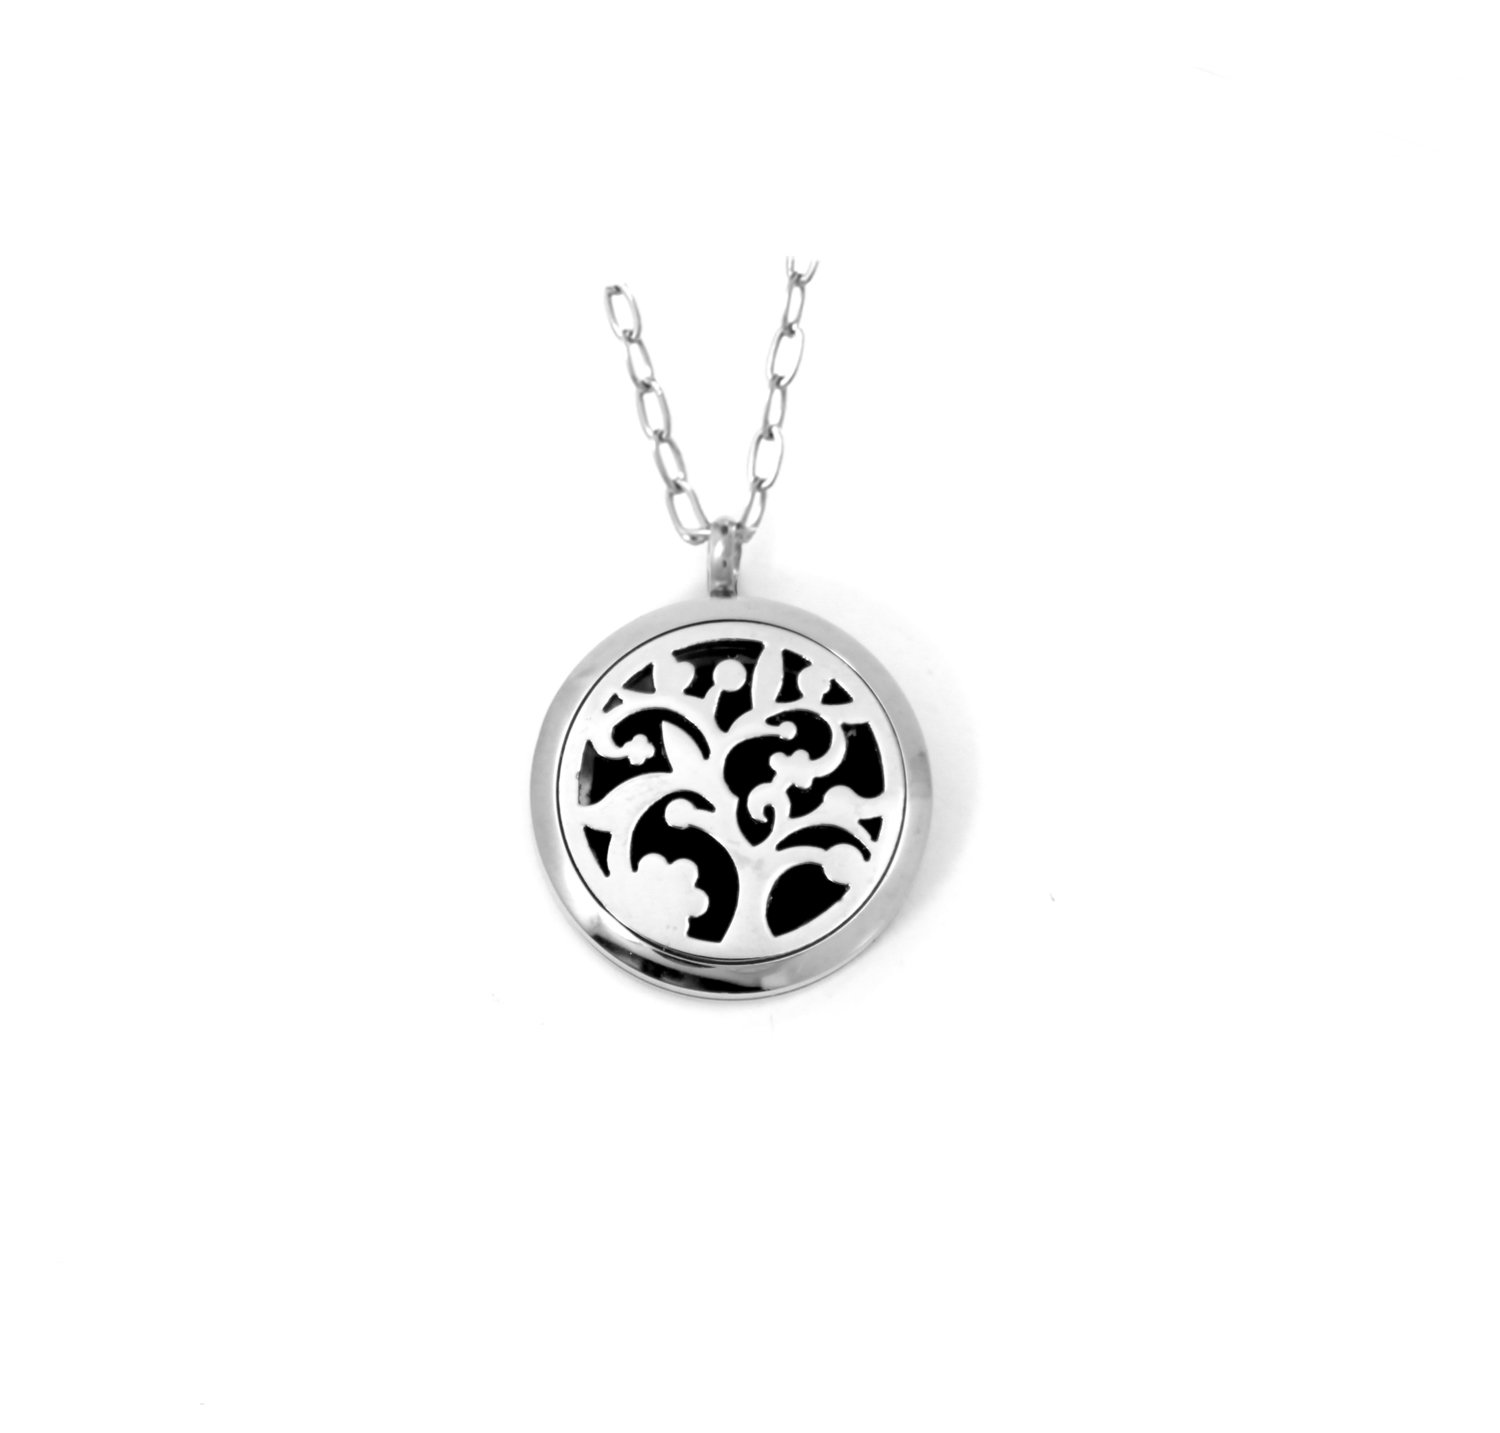 Diffusing Magnetic Gnarly Tree Pendant - includes Two Leather Inserts